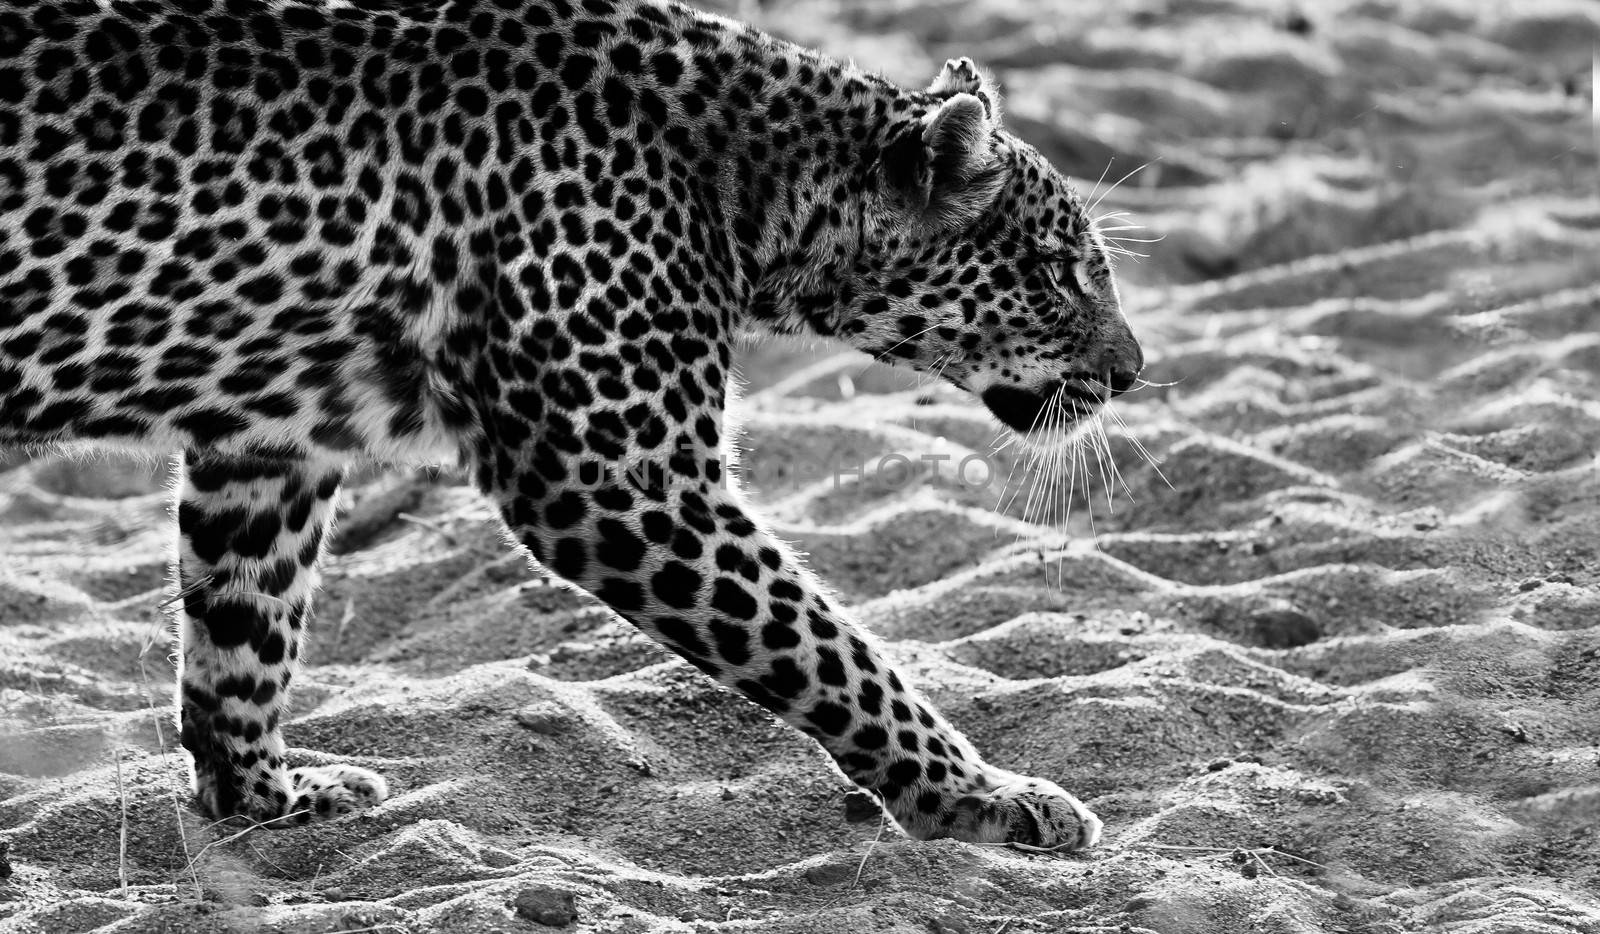 Black and white image of a leopard walking in the sand